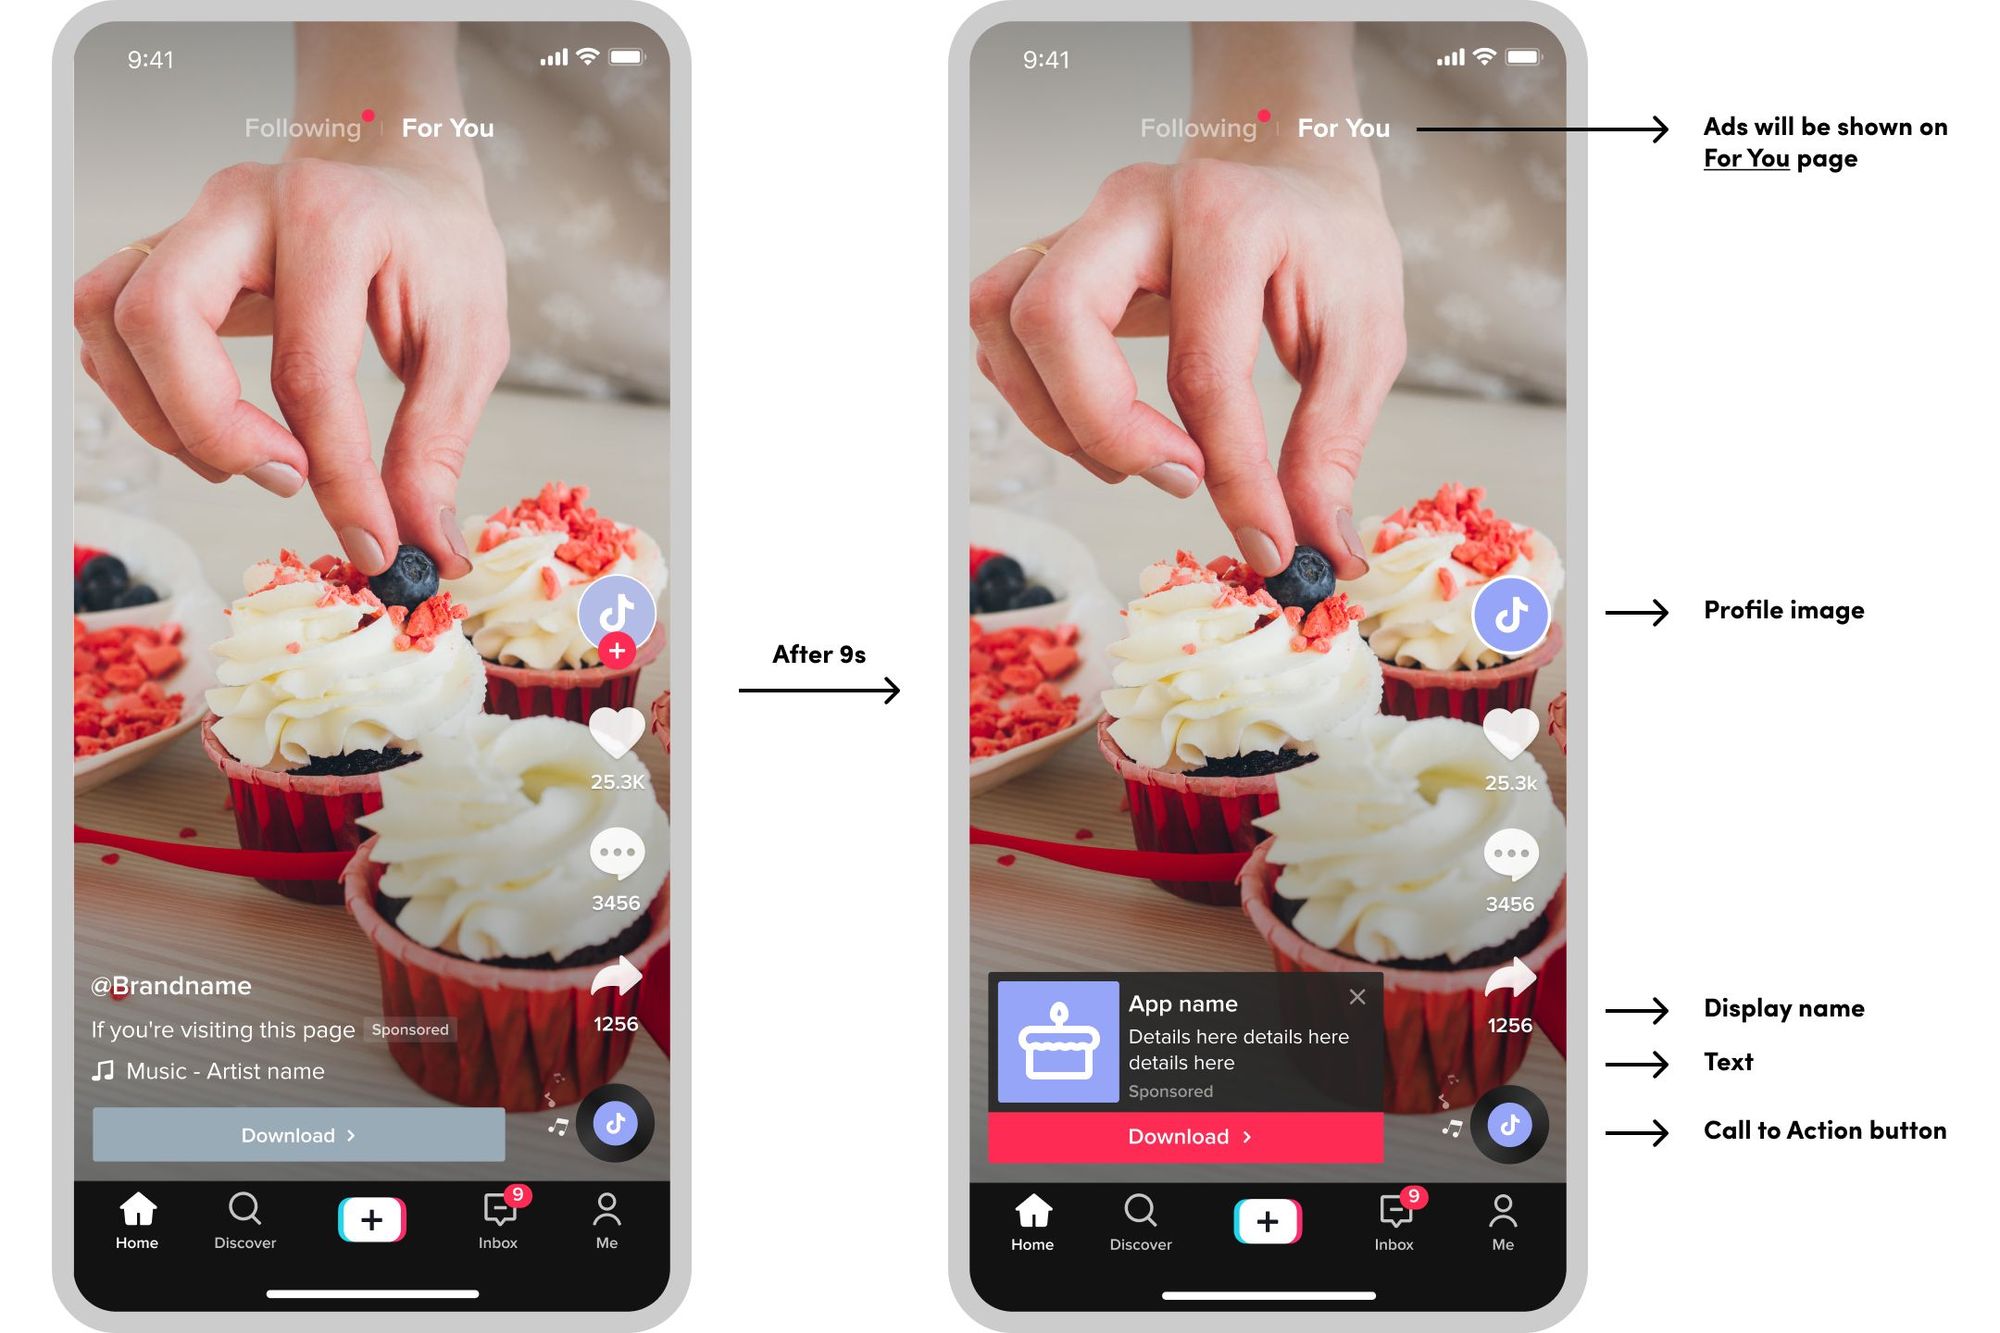 A TikTok screen transition illustrating pre and post ad display with user interface elements.